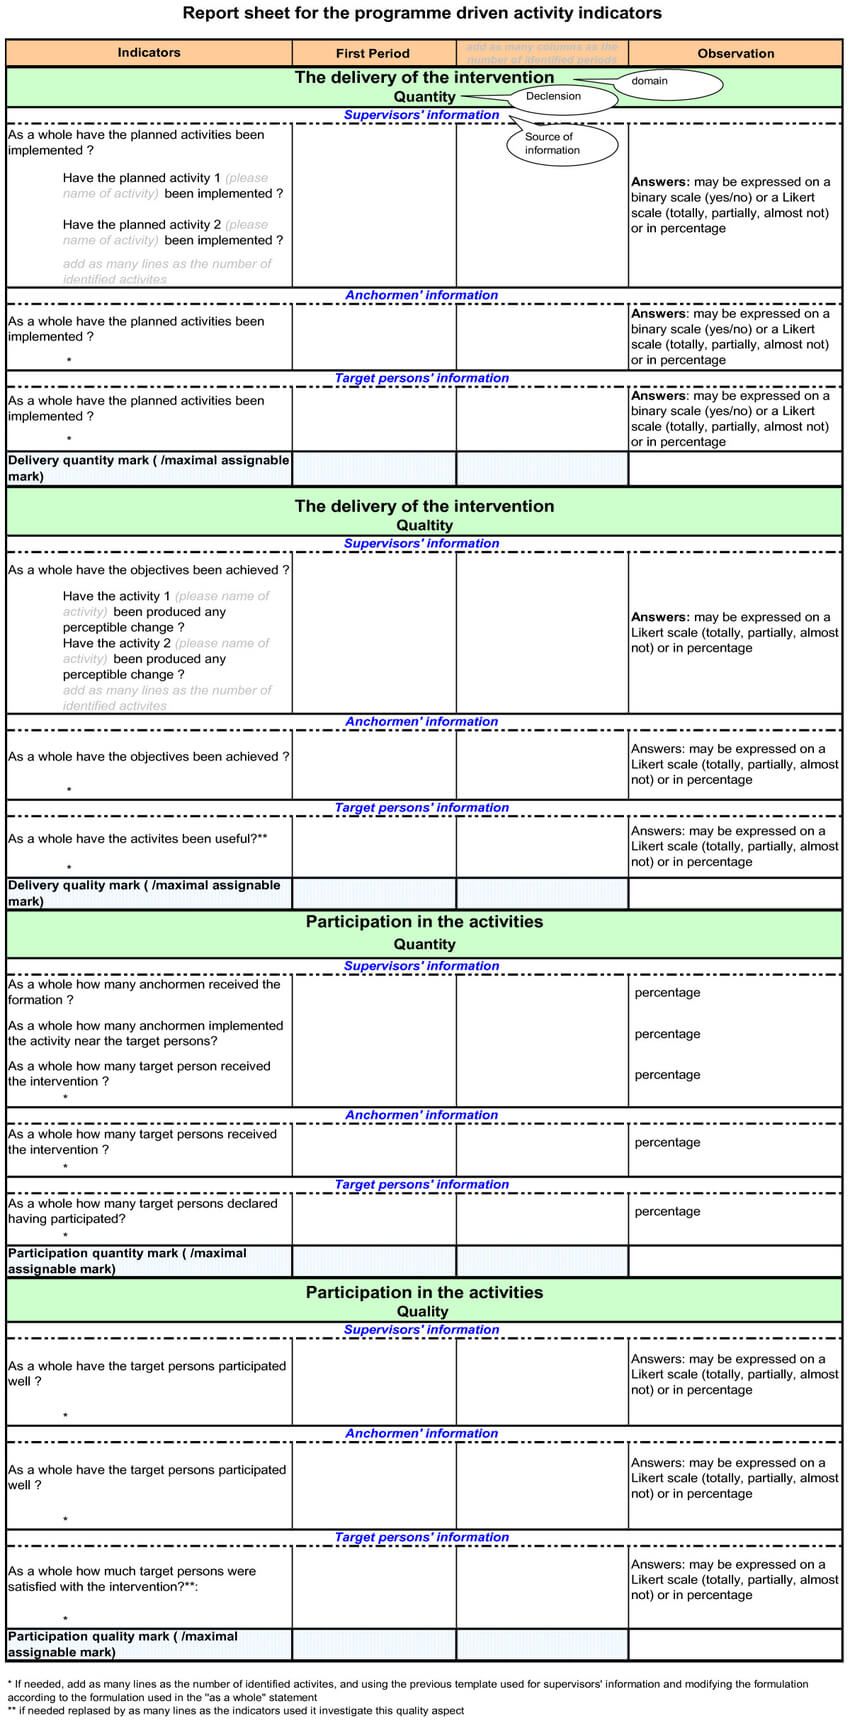 Template Of Indicators Report Sheet. | Download Scientific With Regard To Intervention Report Template